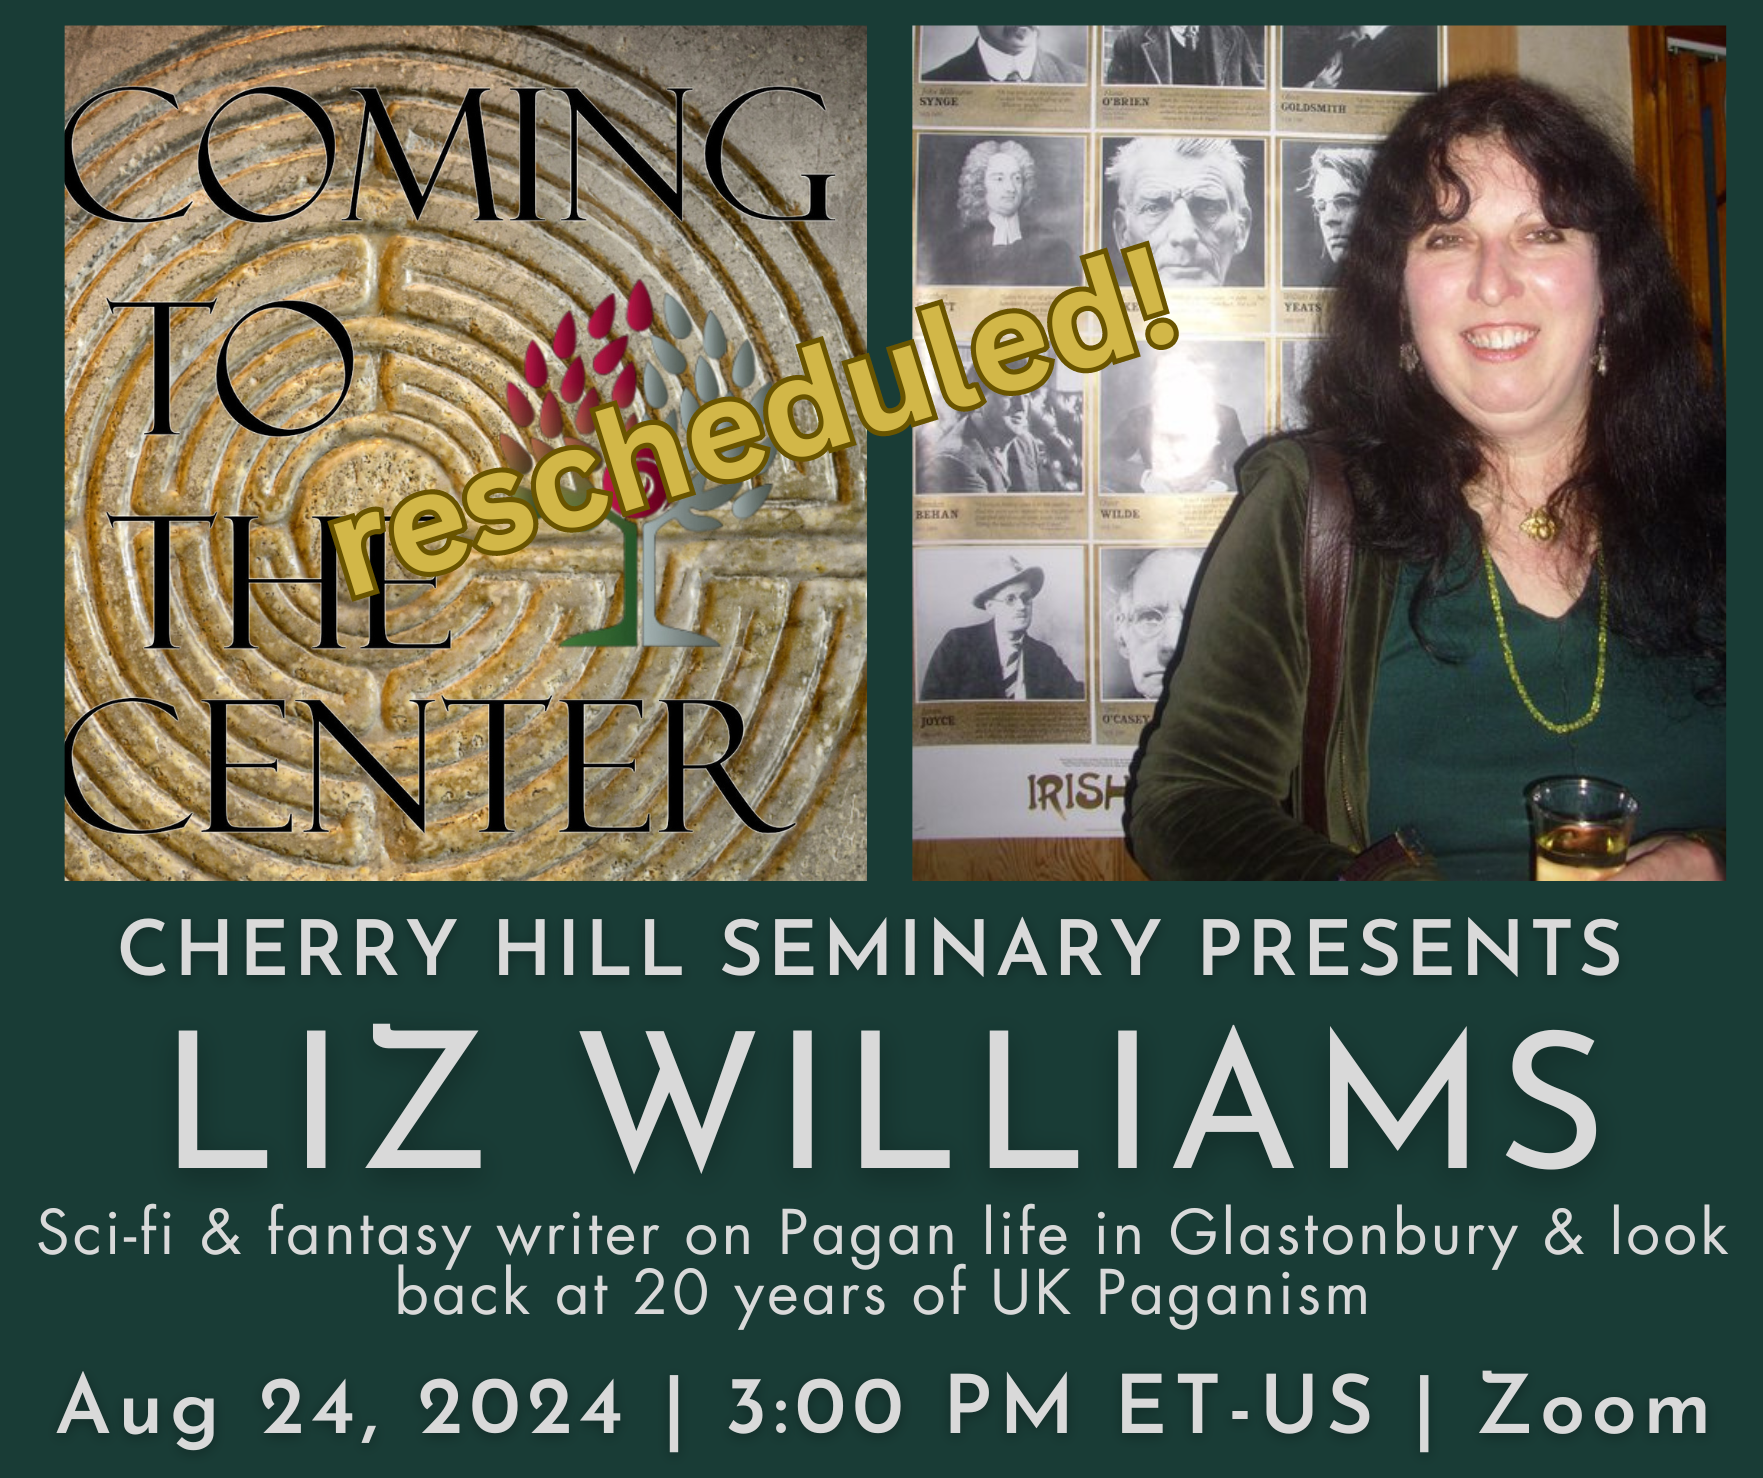 Coming to the Center hosts author Liz Williams, rescheduled for Aug 24